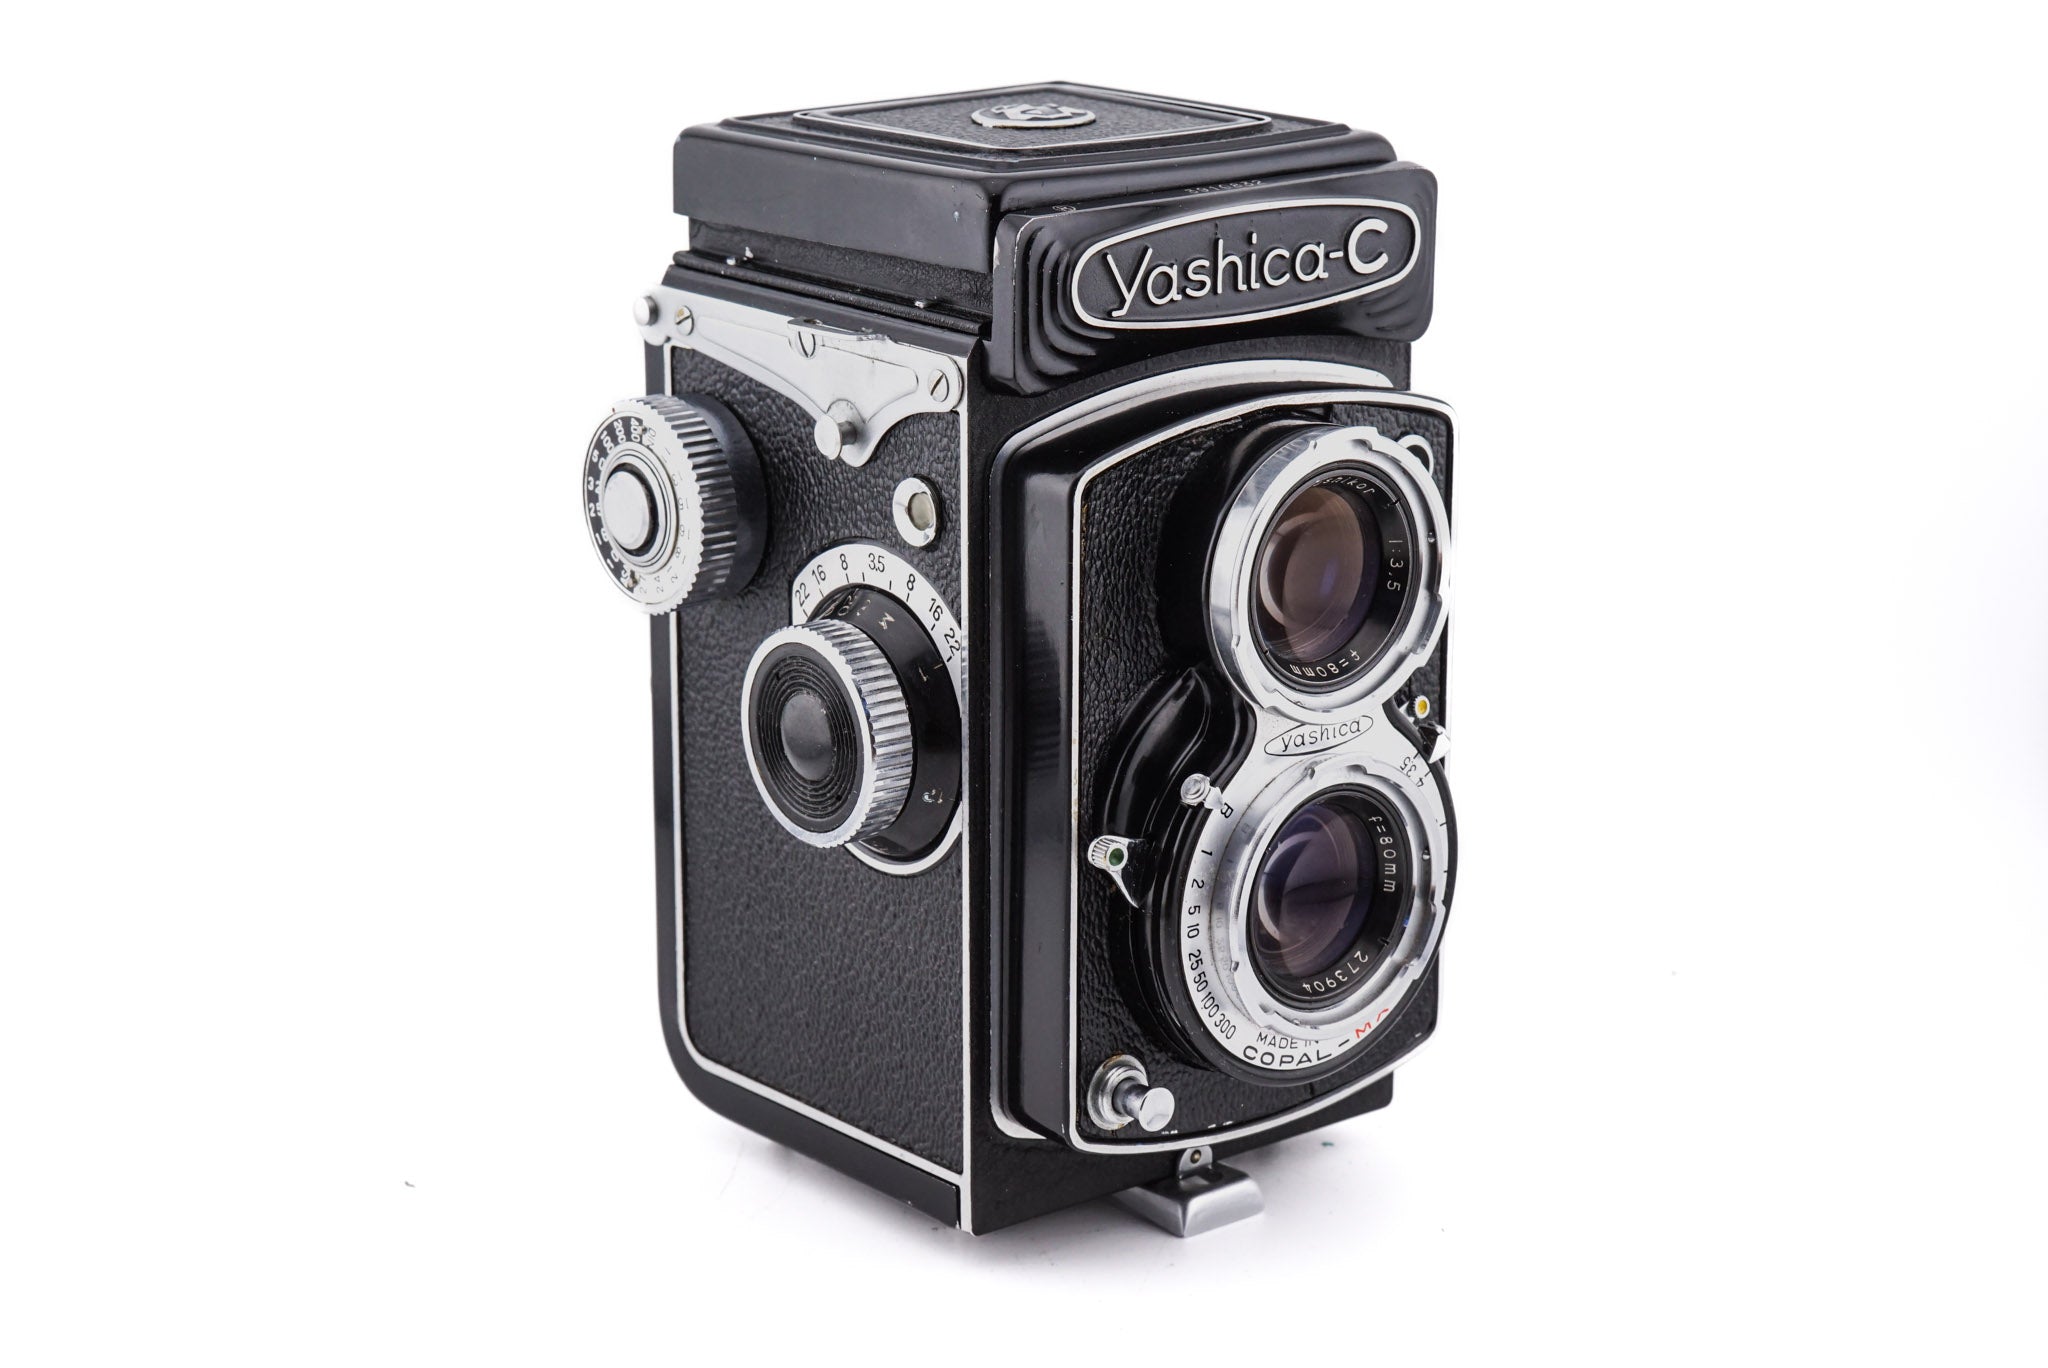 Yashica C - 120 Film Camera - with 6 month warranty